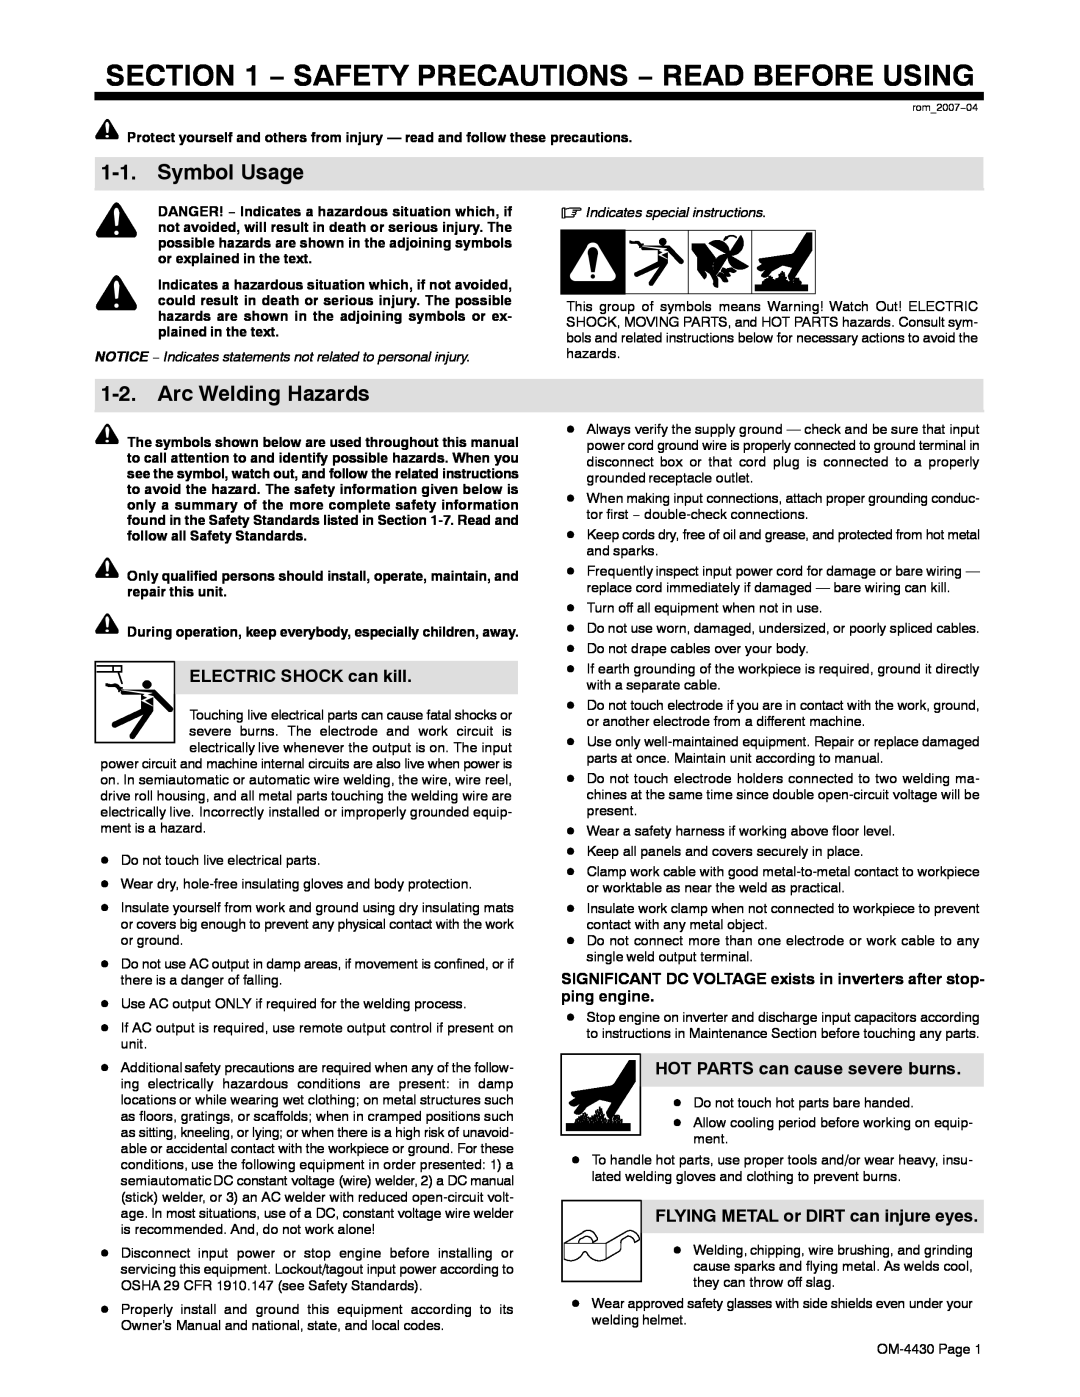 Miller Electric 280 NT manual Symbol Usage, Arc Welding Hazards, Safety Precautions − Read Before Using 